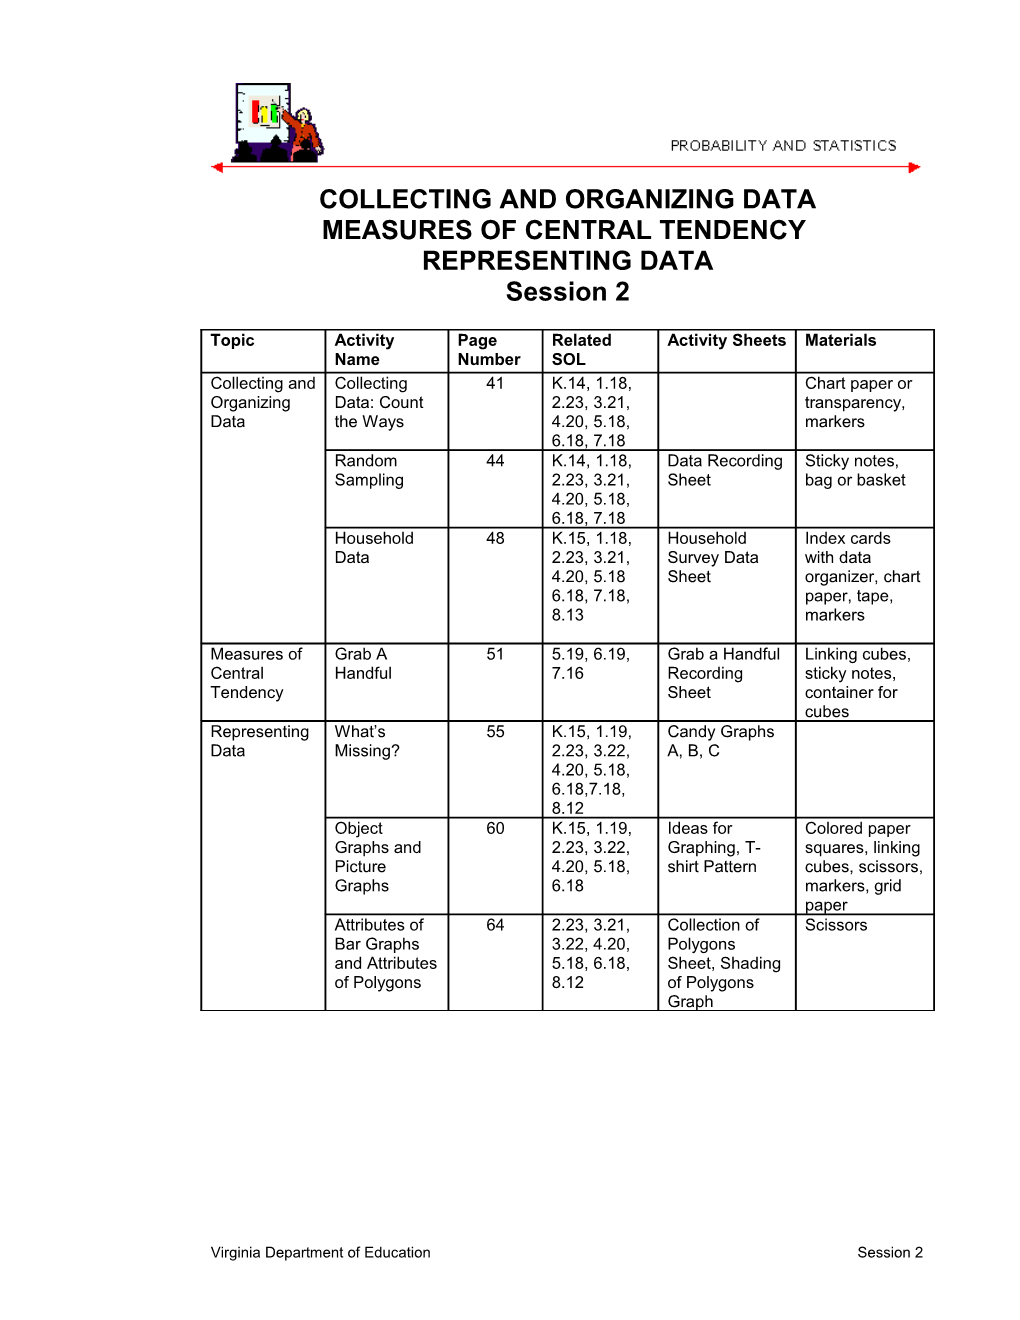 Collecting and Organizing Data